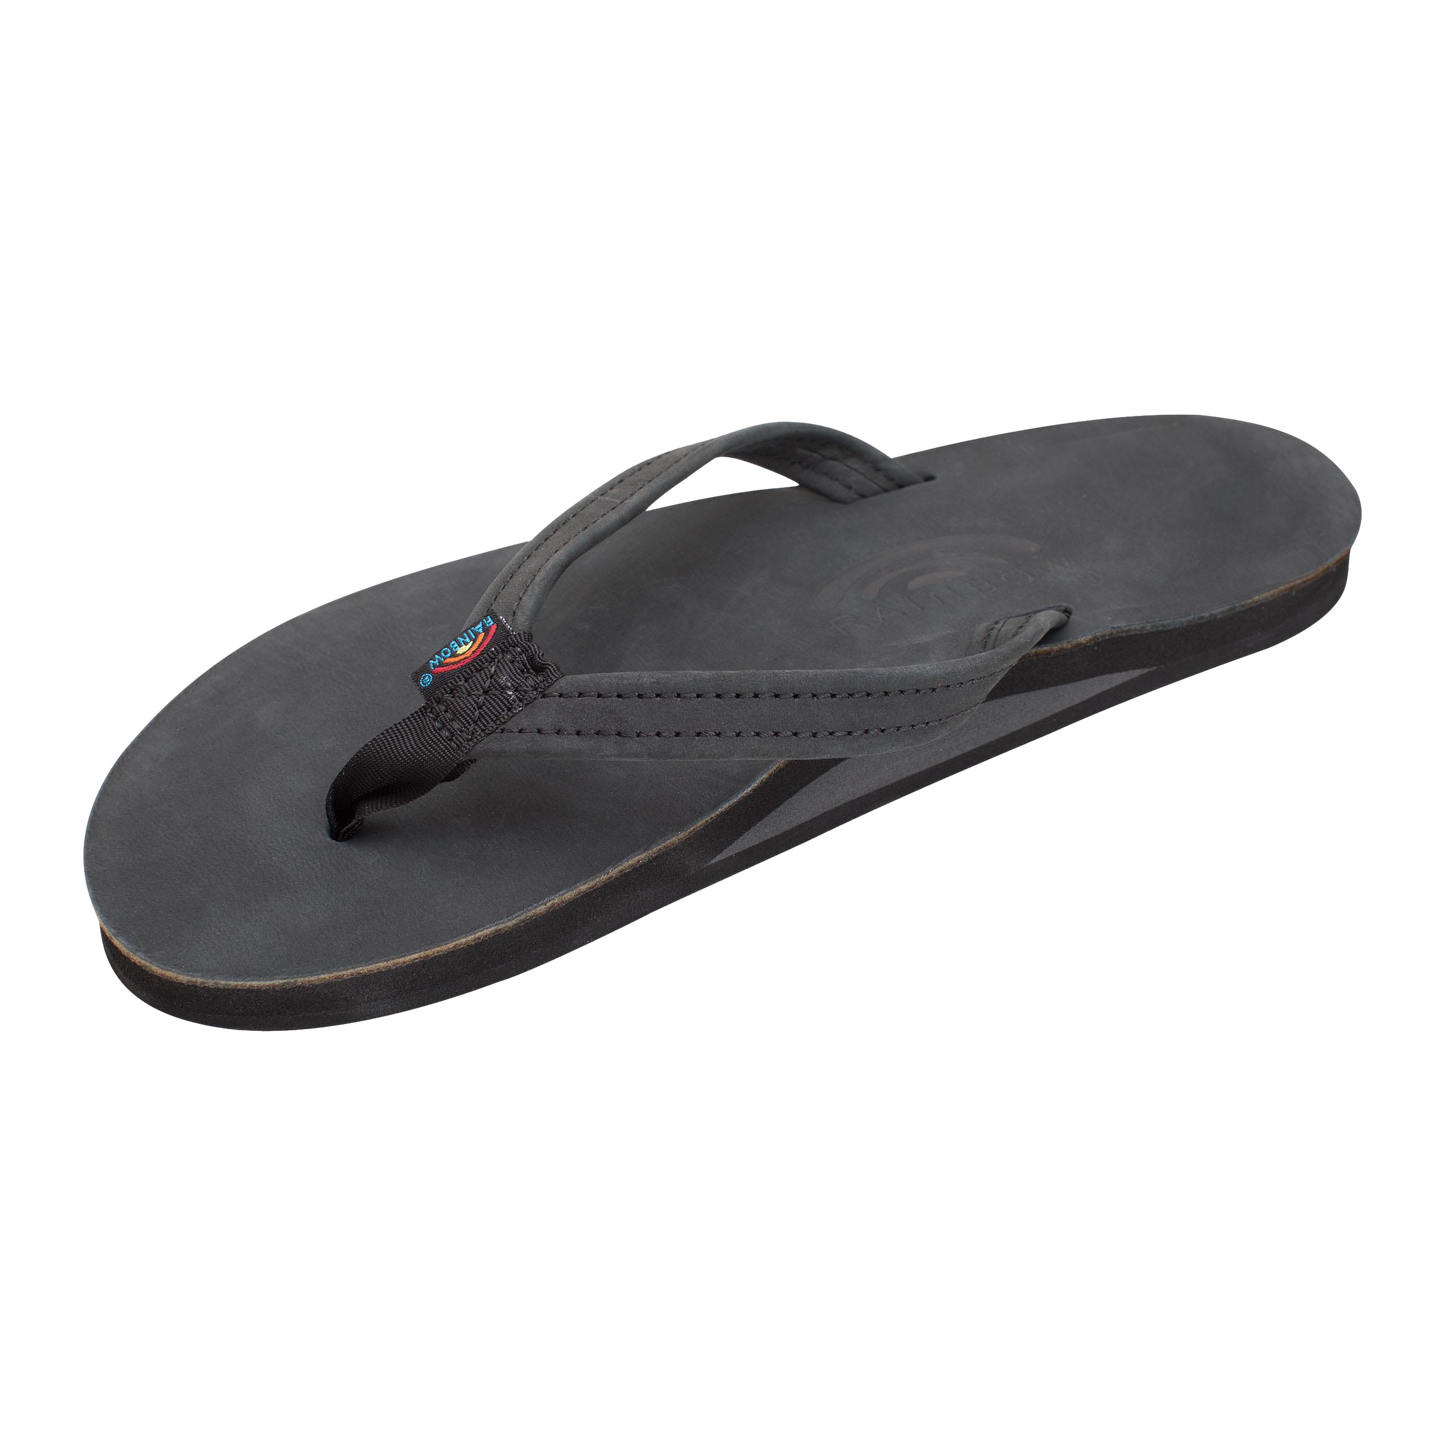 Rainbow Single Layer with Arch Support and a 1/2" Narrow Strap Black Sandals